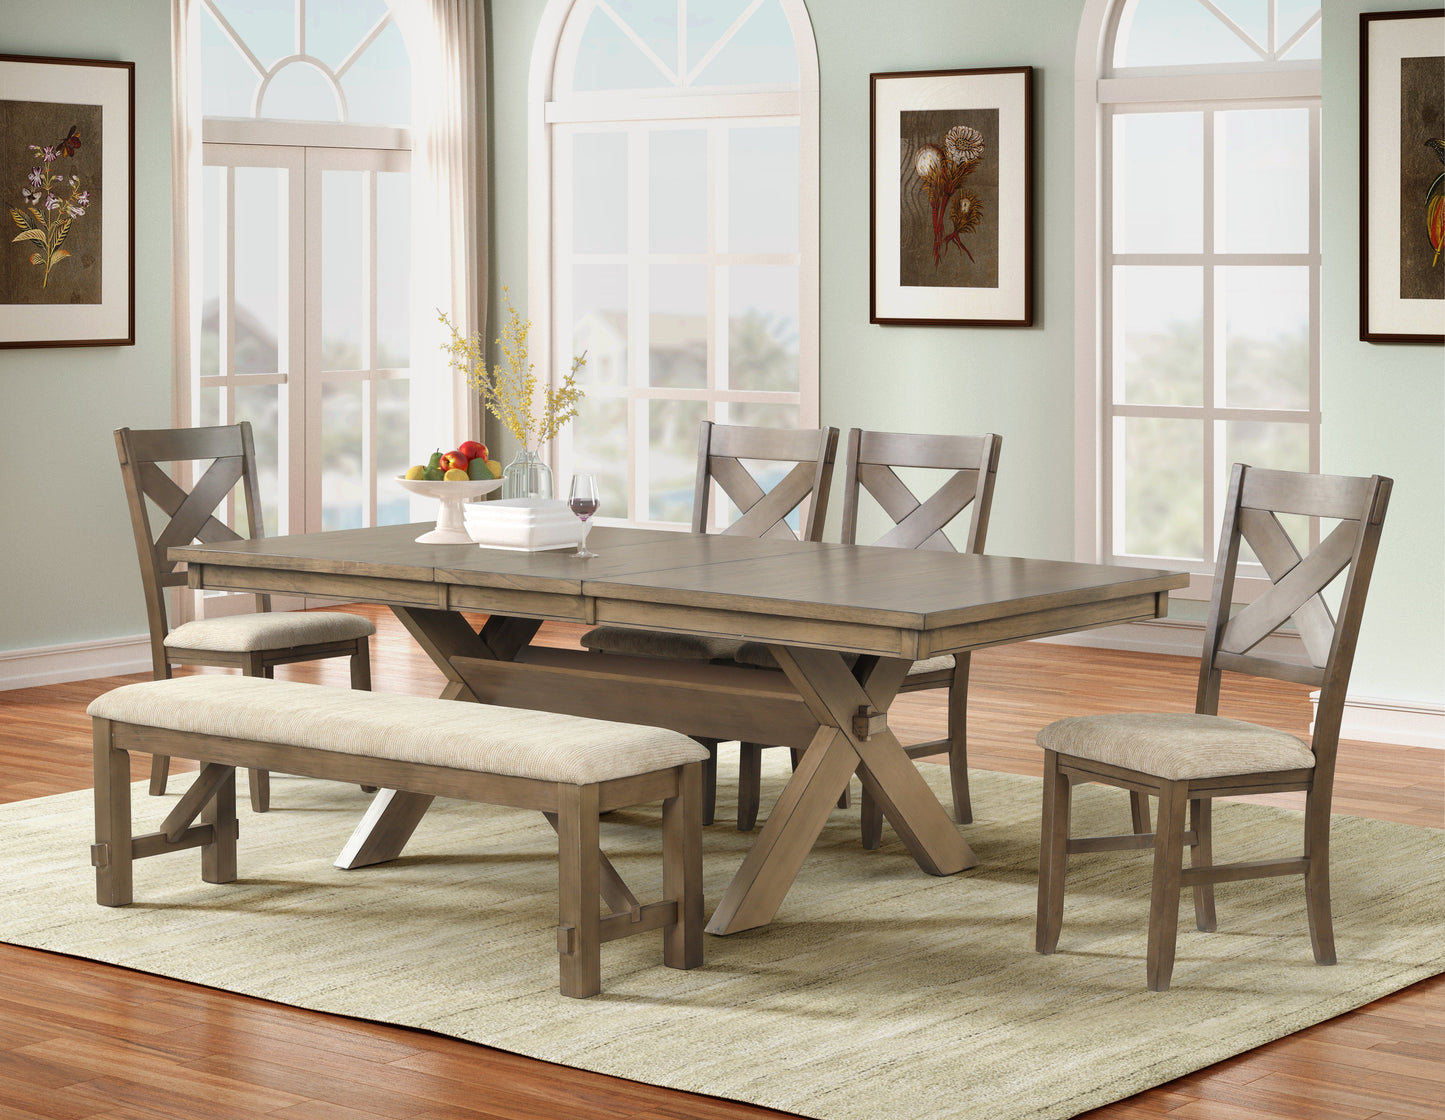 Raven Wood 6-Piece Dining Set, Extendable Trestle Dining Table with 4 Chairs and Bench, Glazed Pine Brown